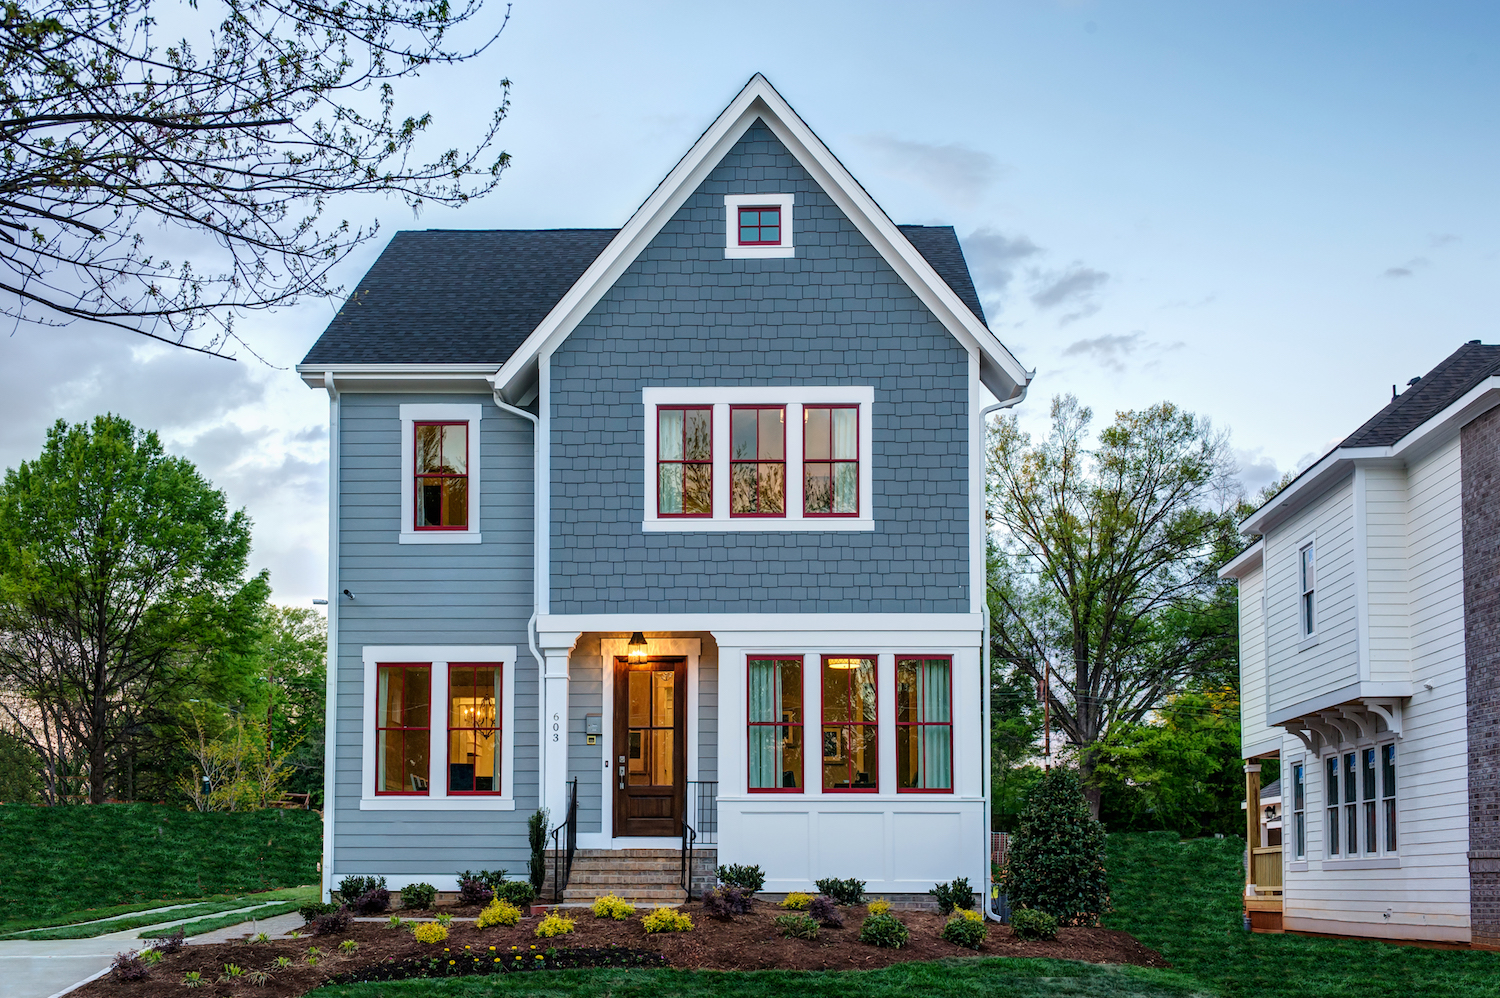 Oakdale at Mordecai, in Raleigh, N.C., with rear-loaded garages and diverse architectural styles is built by Robuck Homes and designed by GMD Design Group.